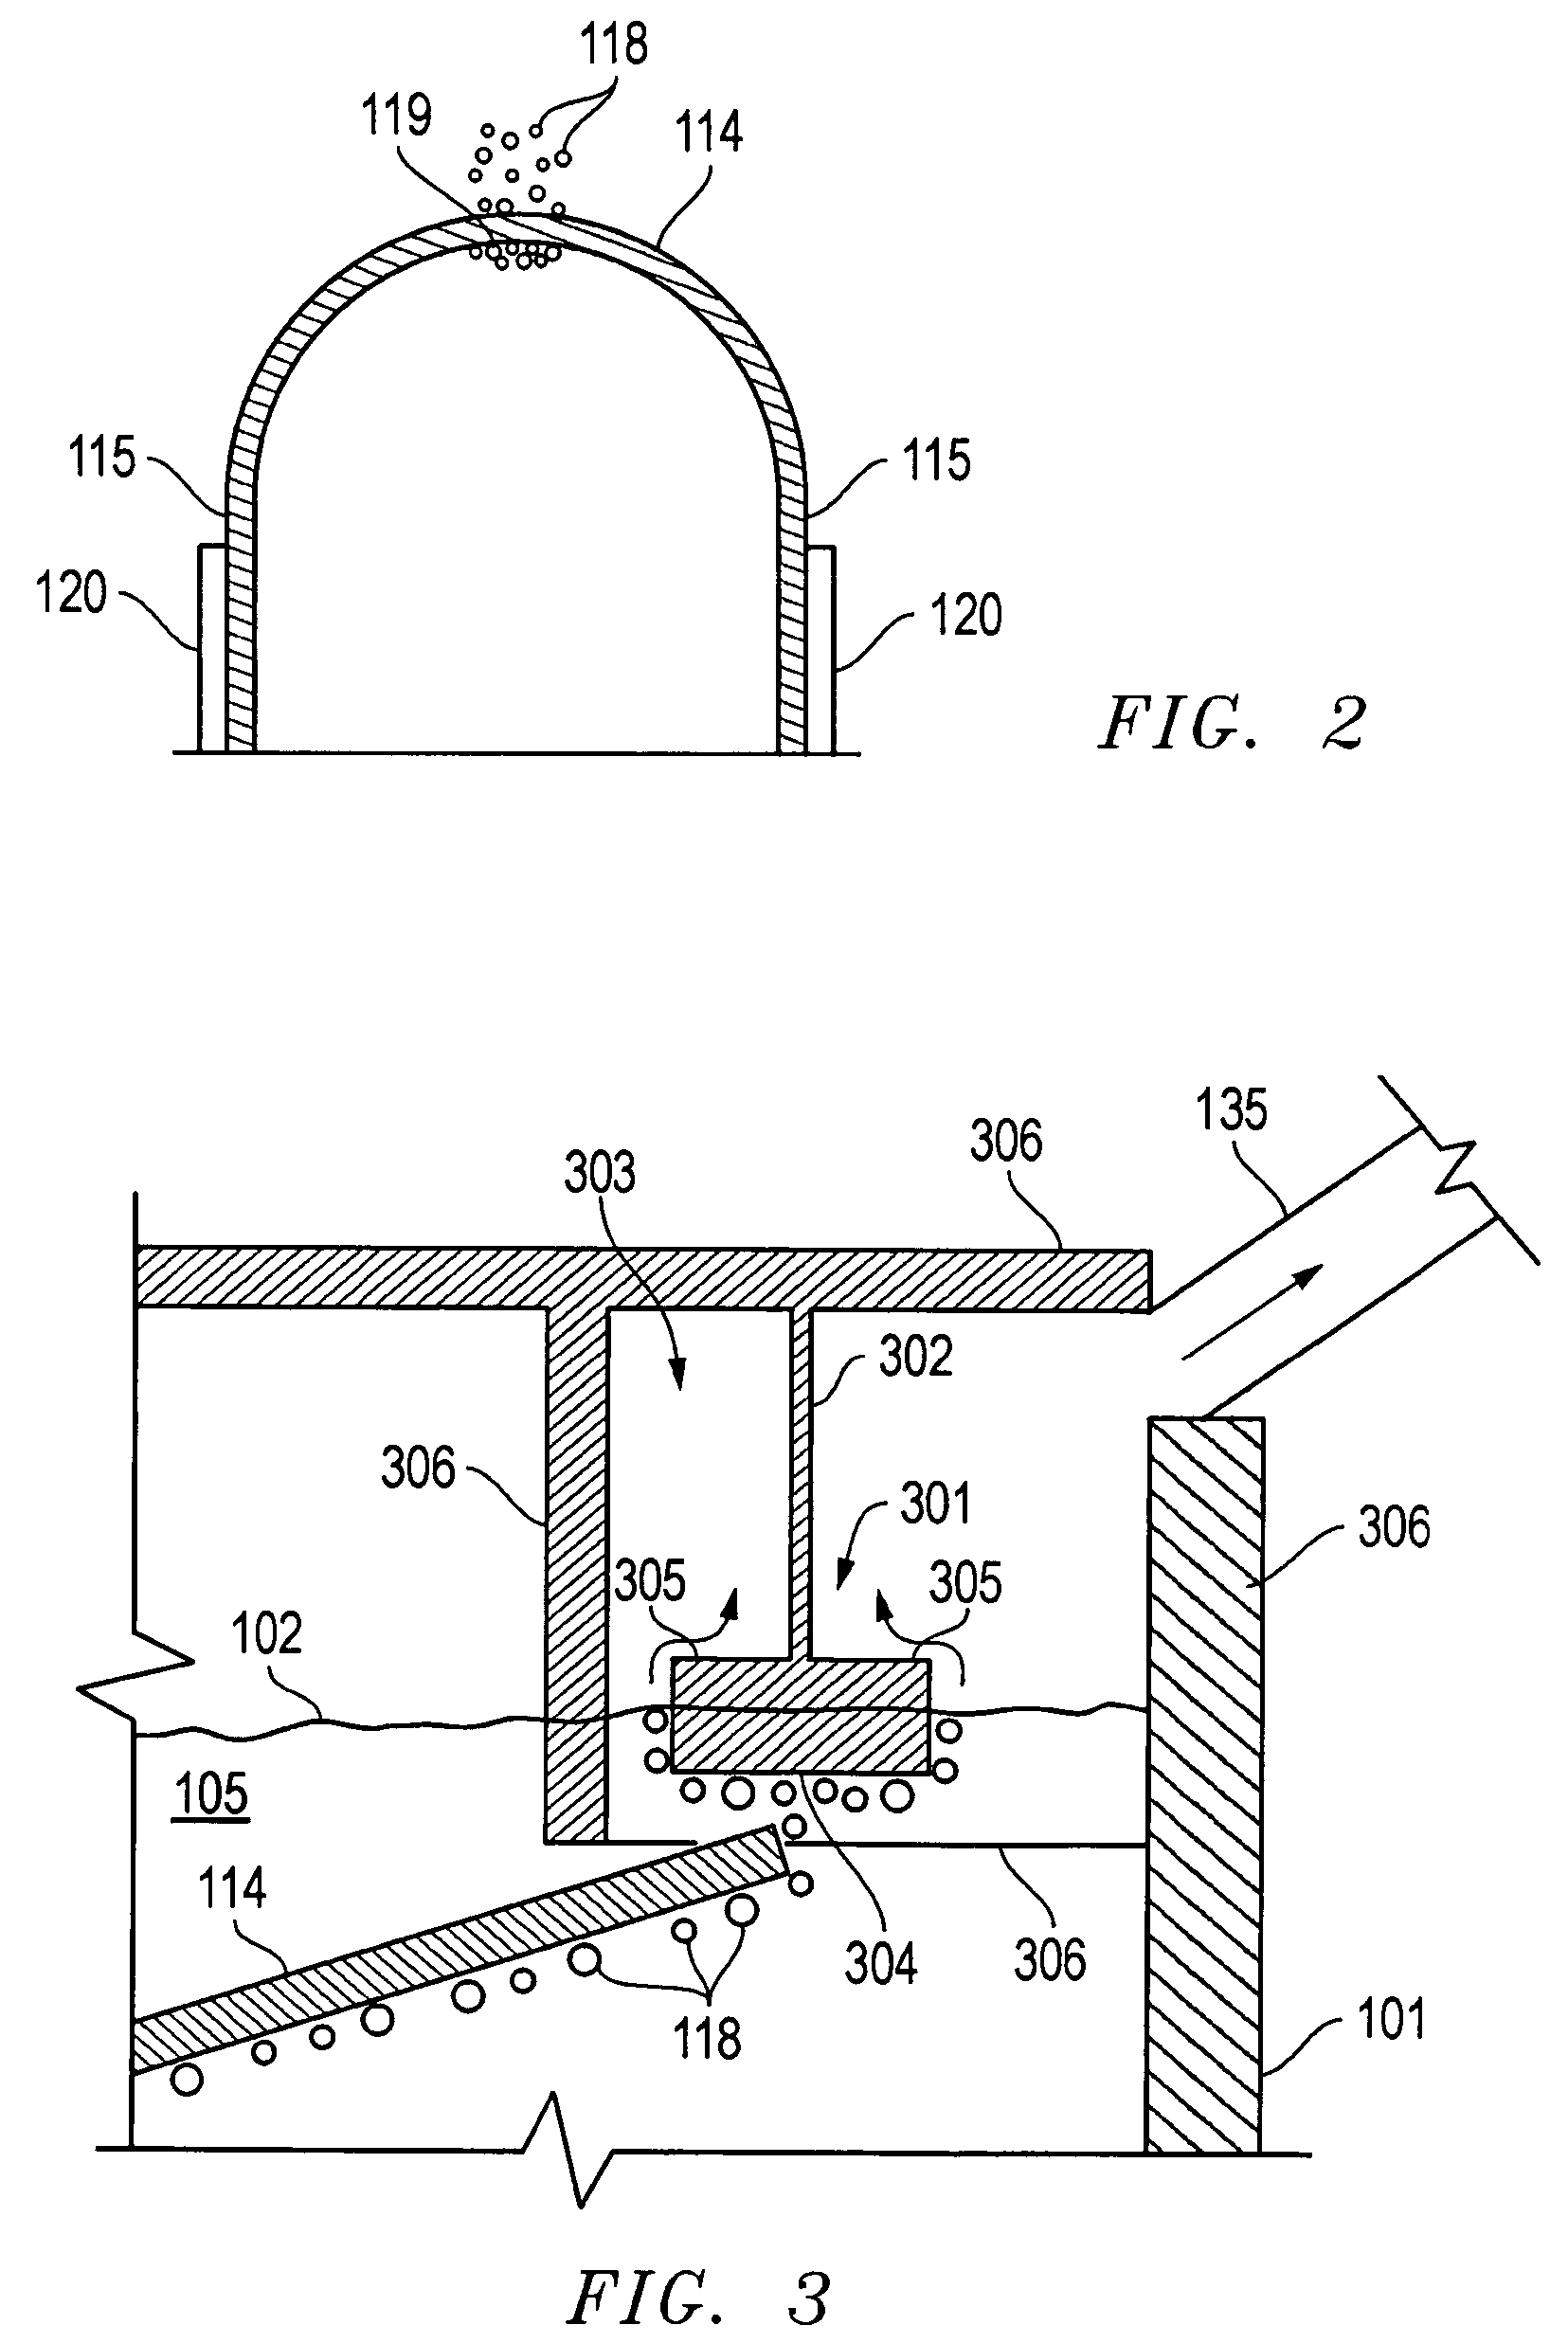 Method and apparatus for preparing a collection surface for use in producing carbon nanostructures